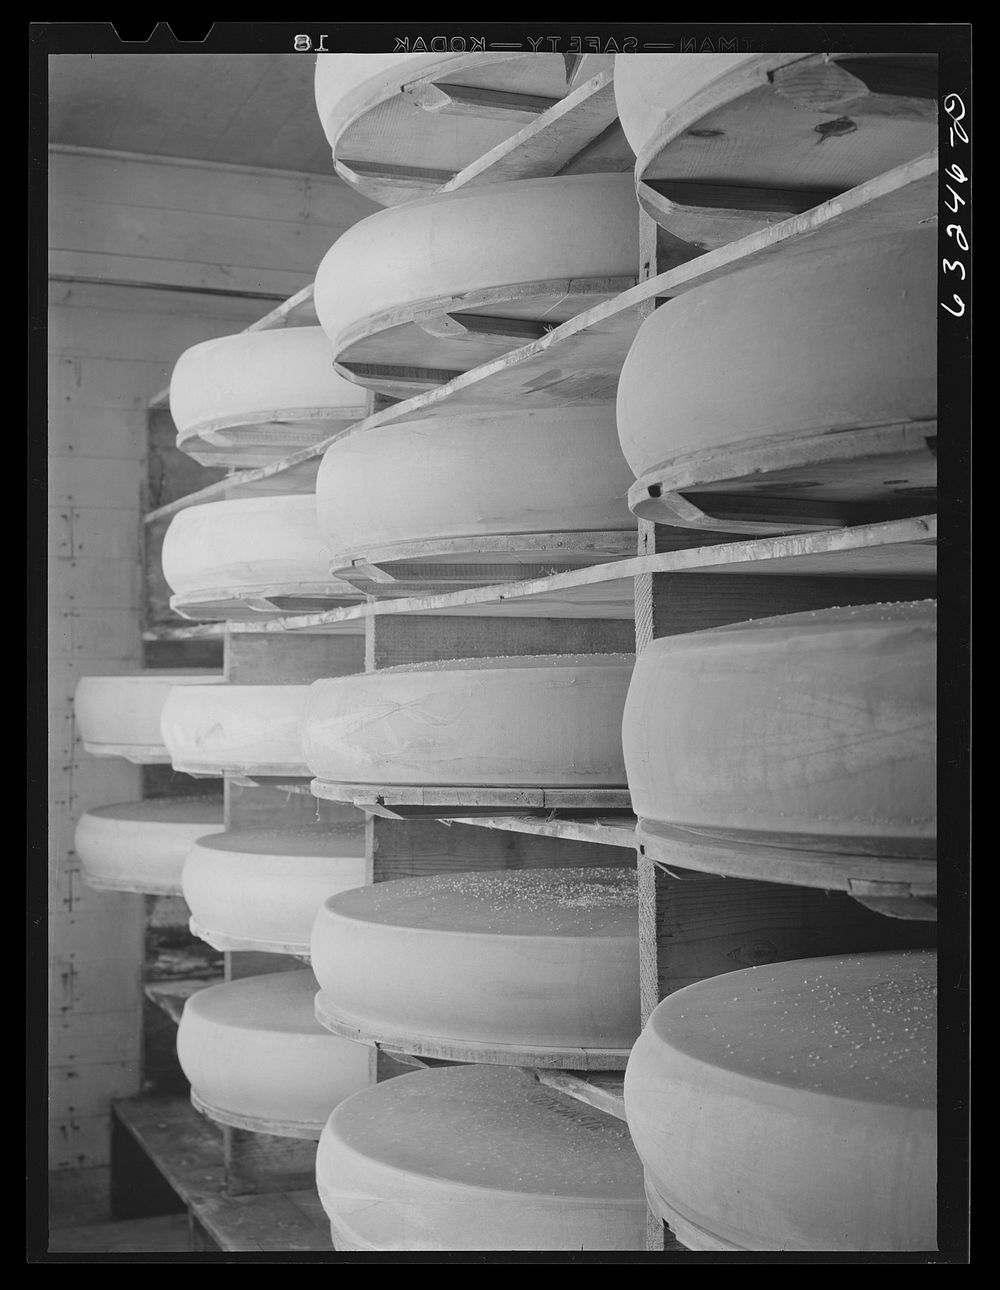 Cheese in storage. Swiss cheese factory. Madison, Wisconsin. Sourced from the Library of Congress.